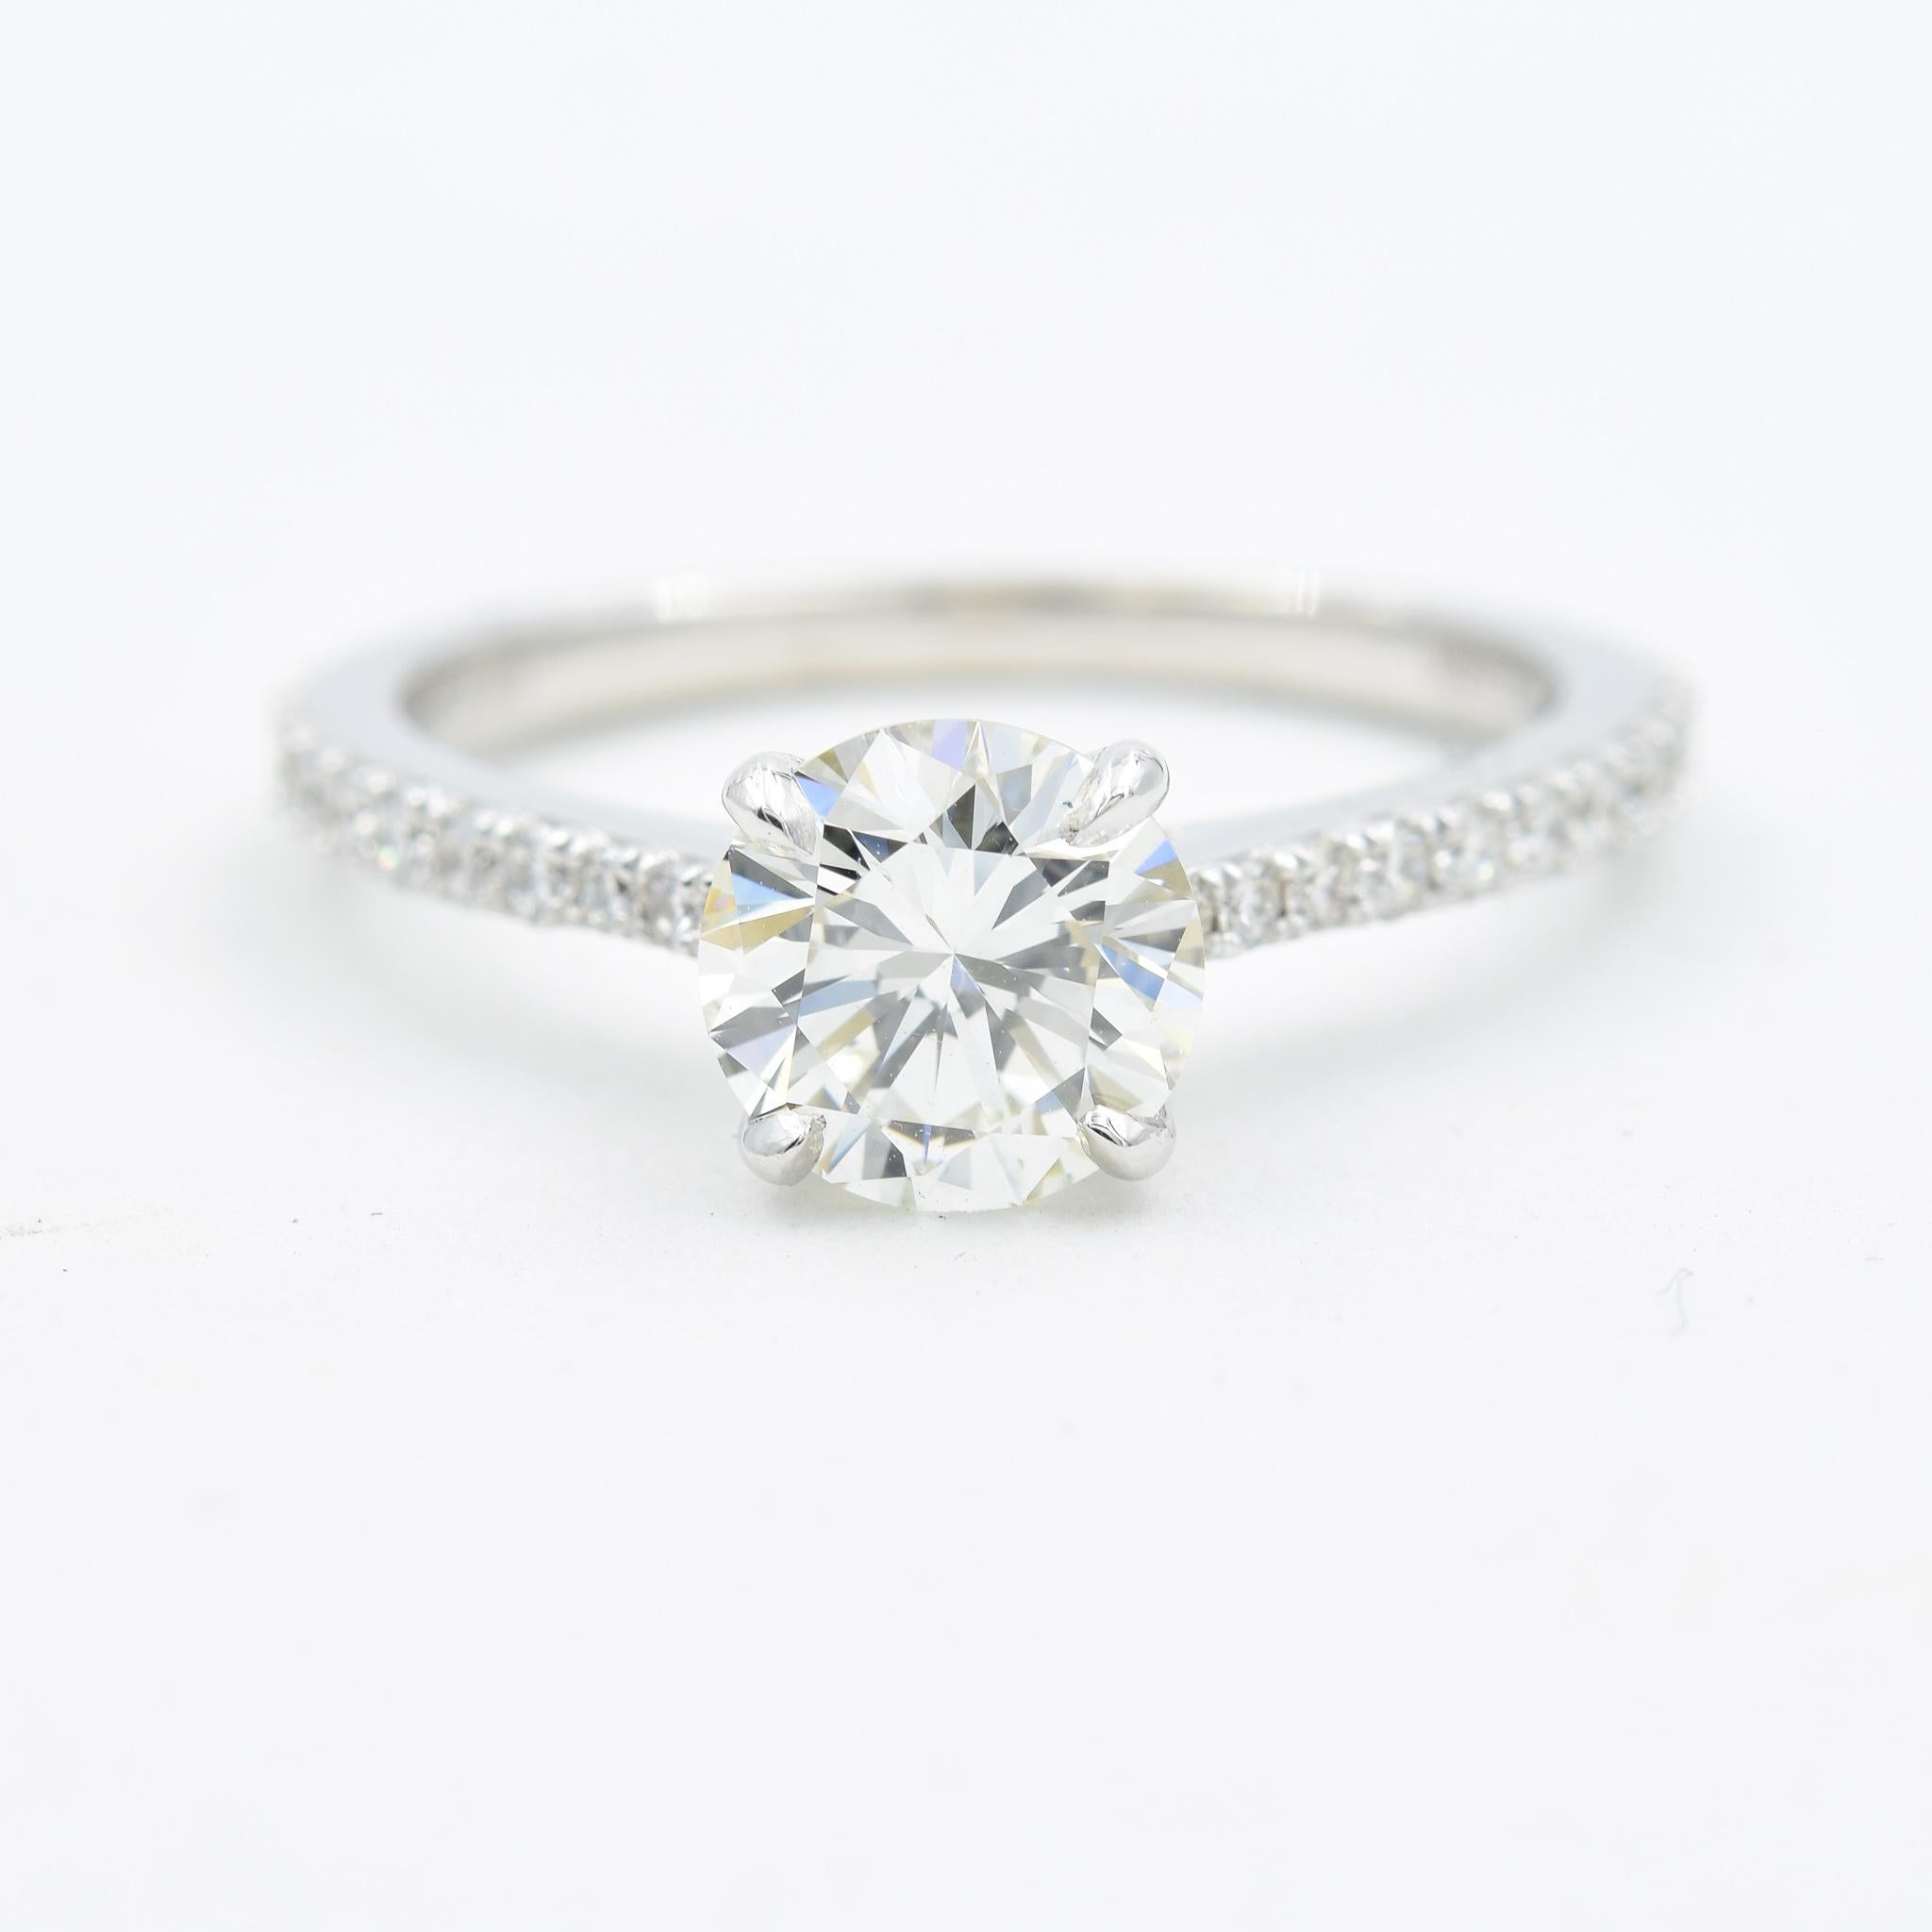 This engagement ring has 1.54 carats total weight of diamonds with 1.15 carats in the center diamond.  The center is a round brilliant cut and graded by GIA.  
